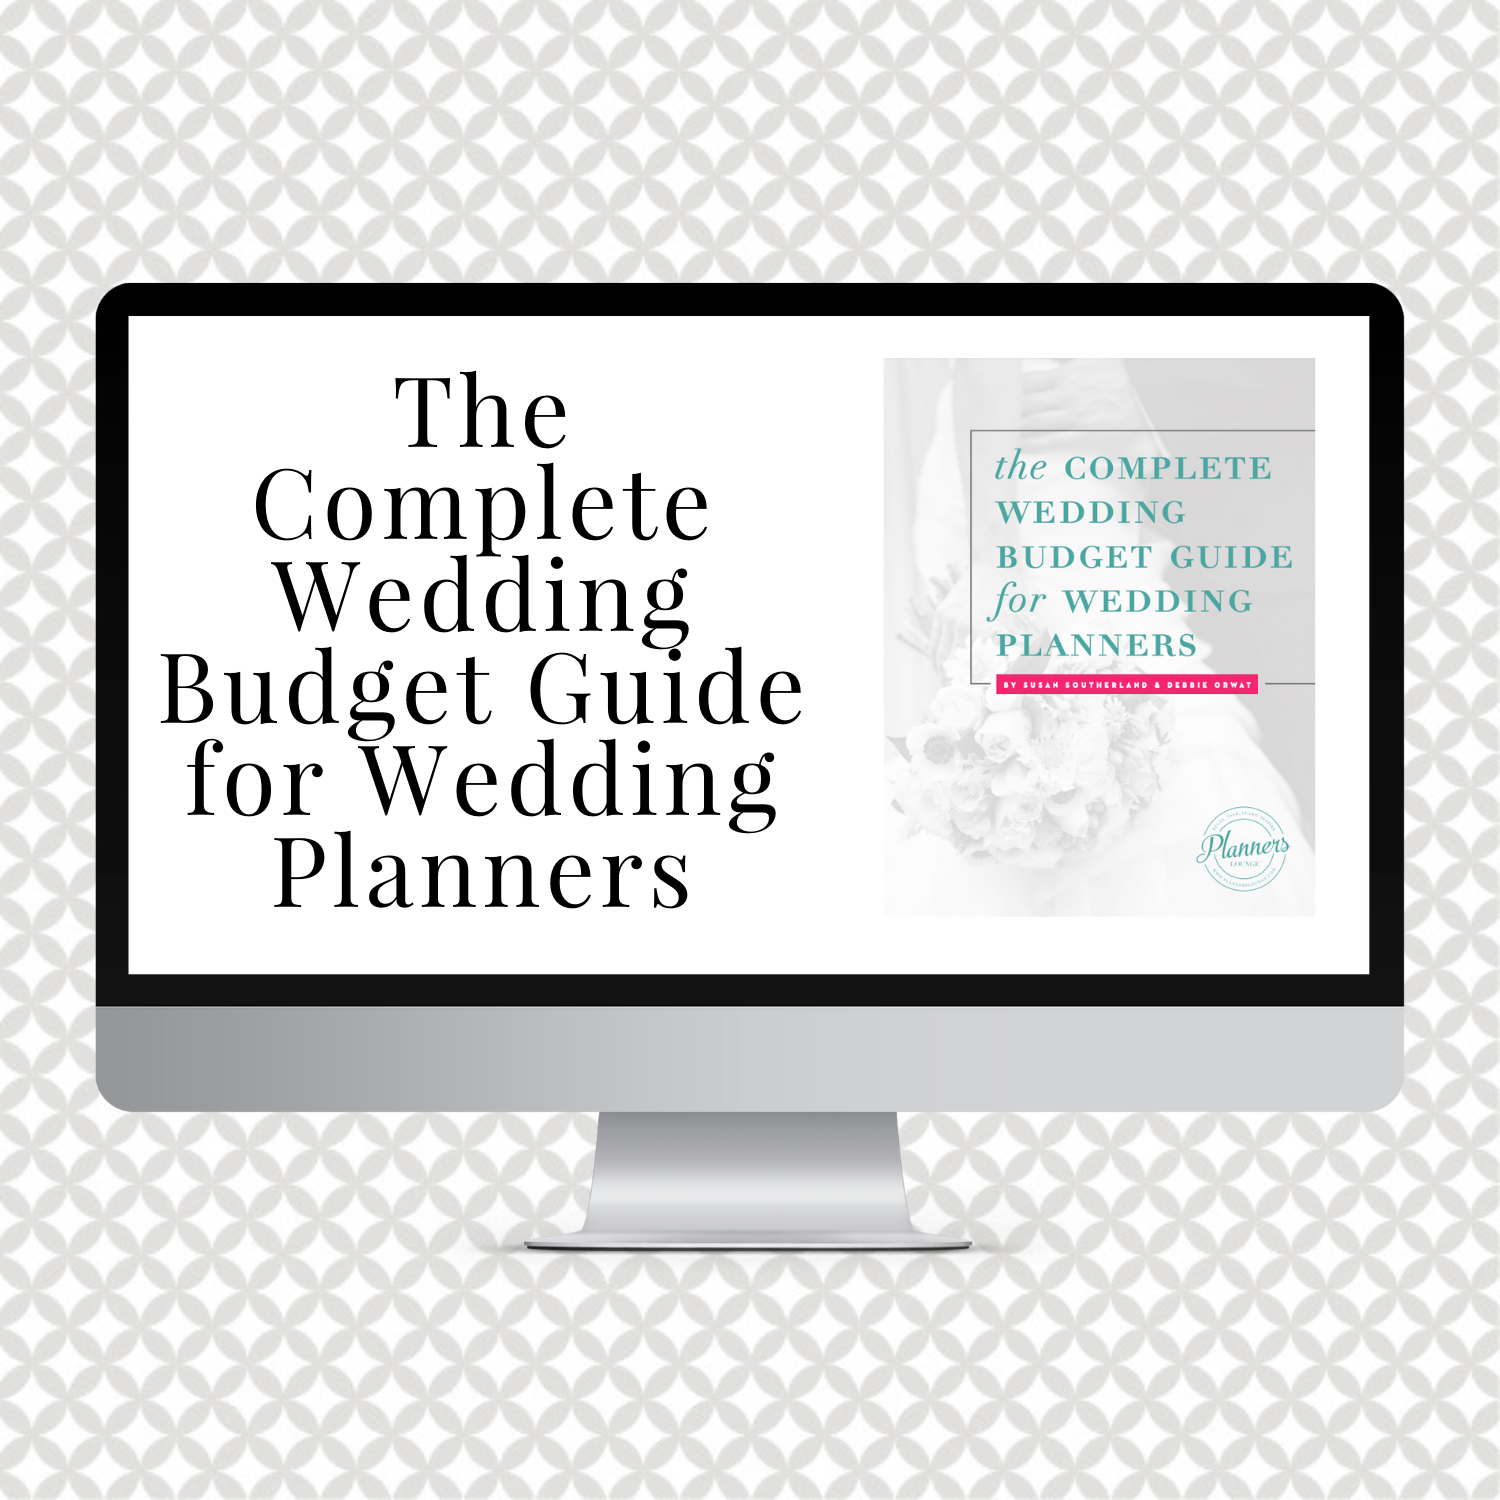 The Complete Wedding Budget Guide for Wedding Planners